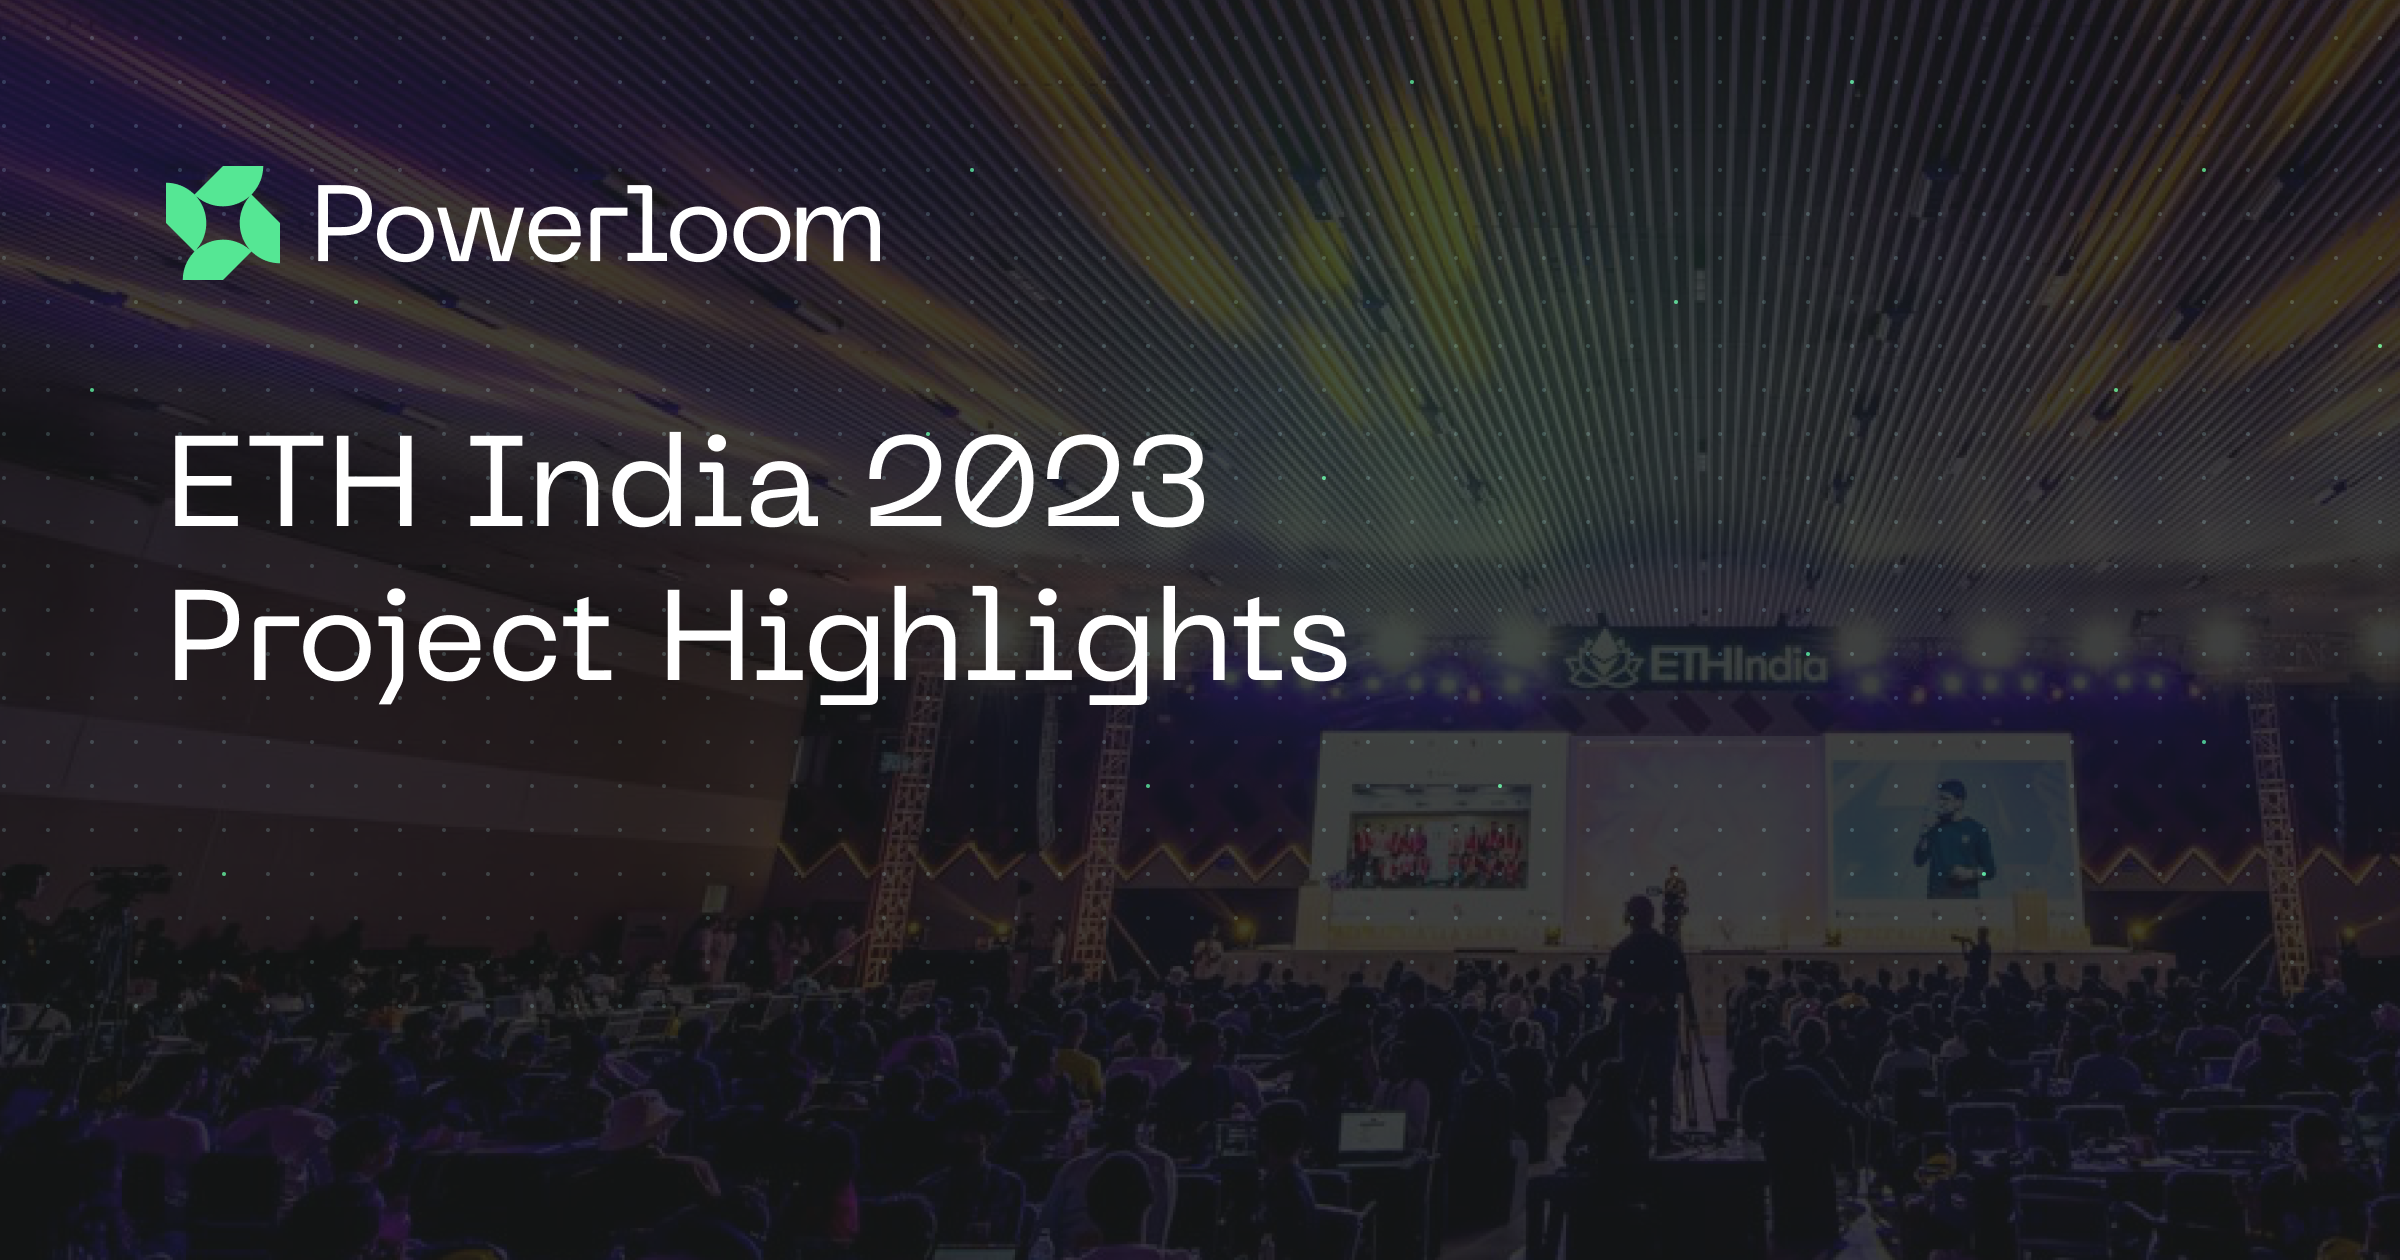 ETH India 2023 Powerloom Project Highlights